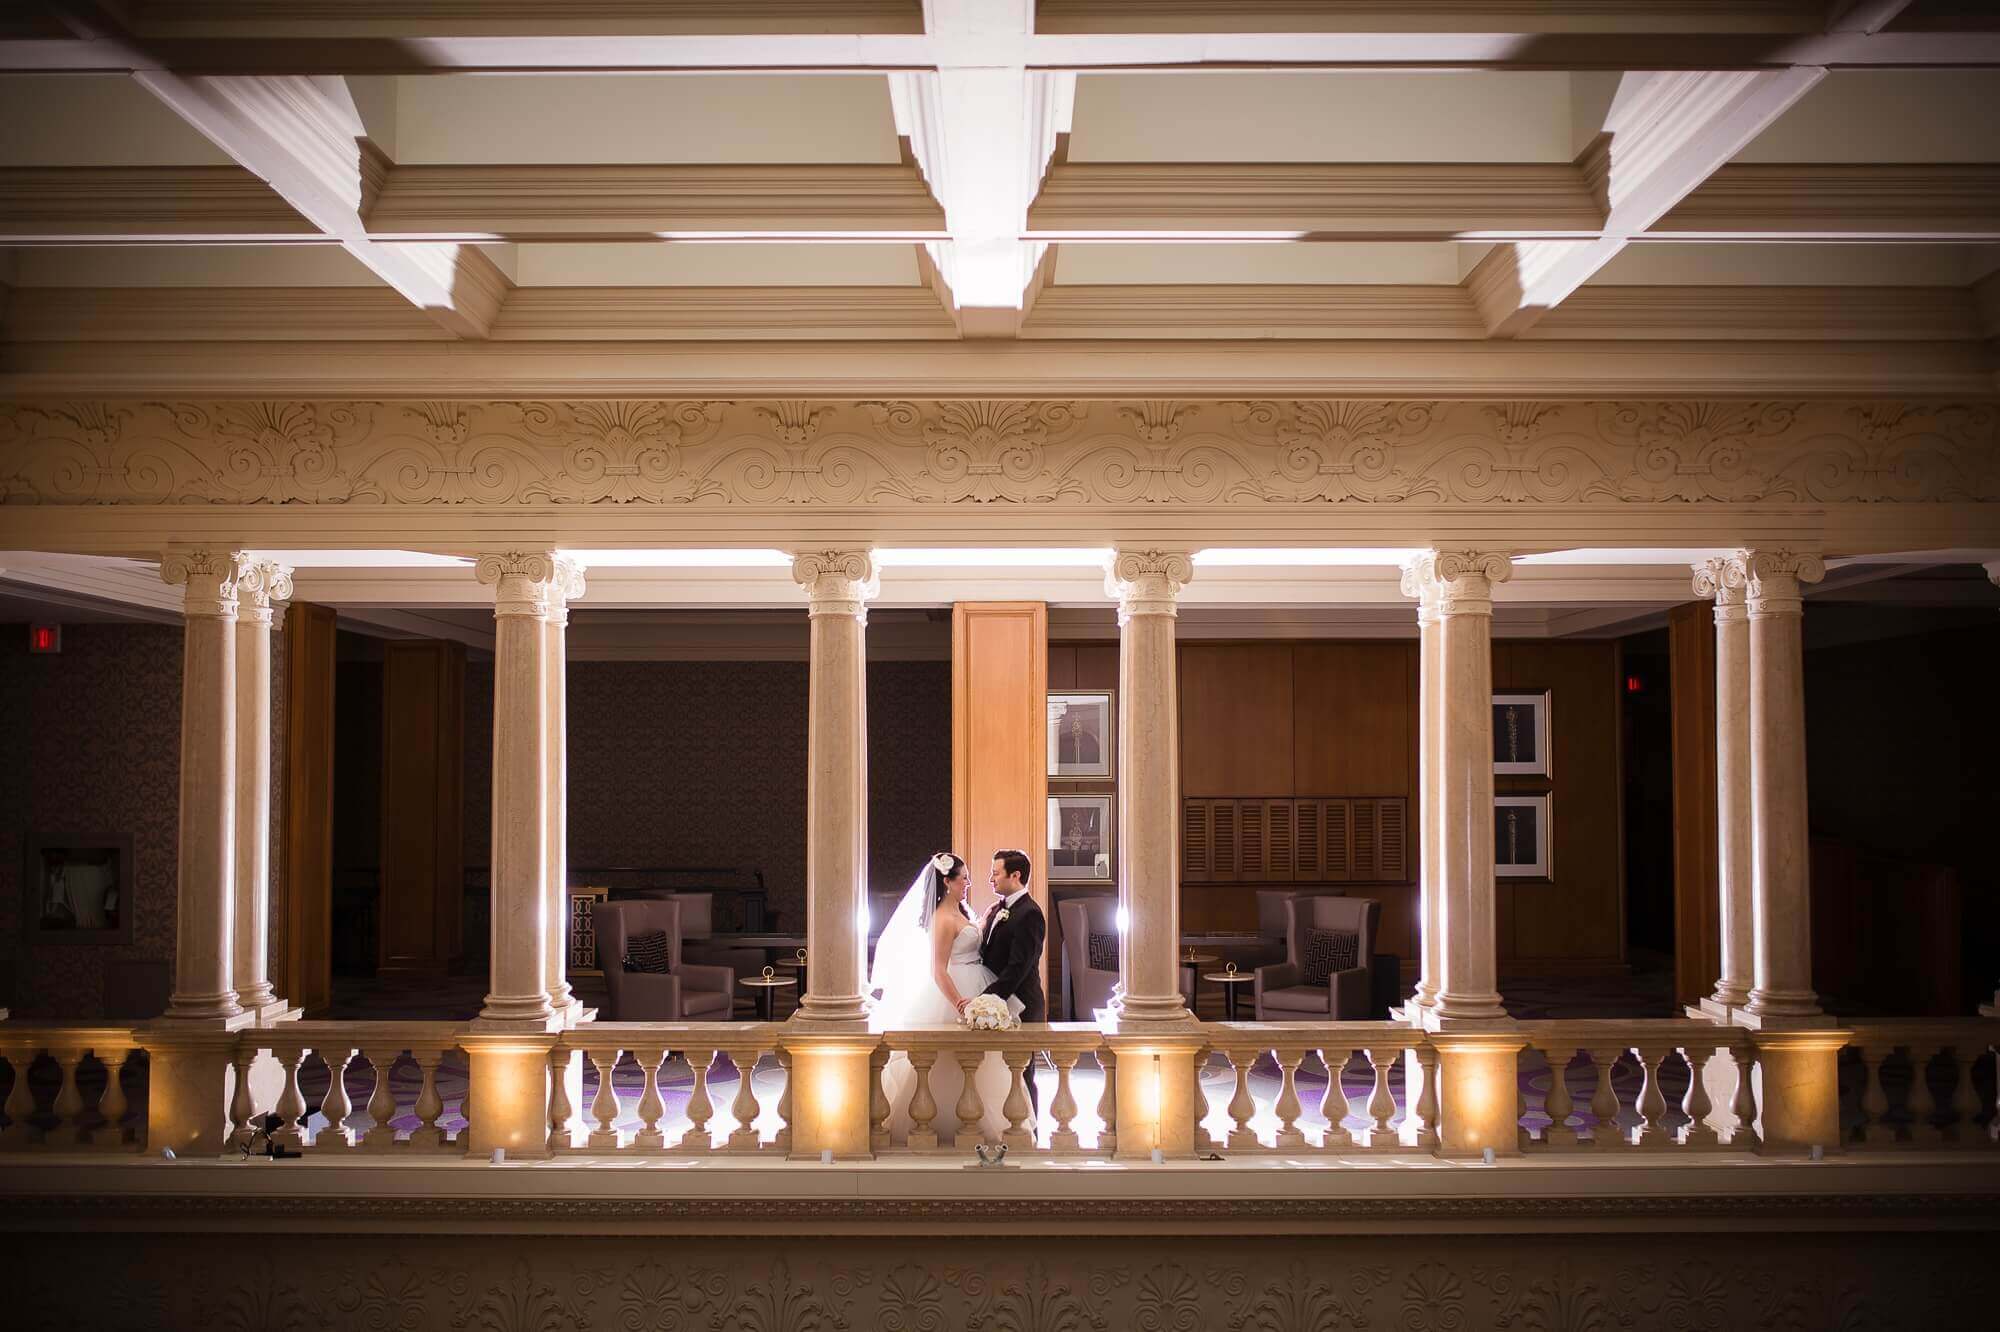 Beautiful architectural portrait of the bride and groom in between the columns at the Omni King Edward Hotel in Toronto